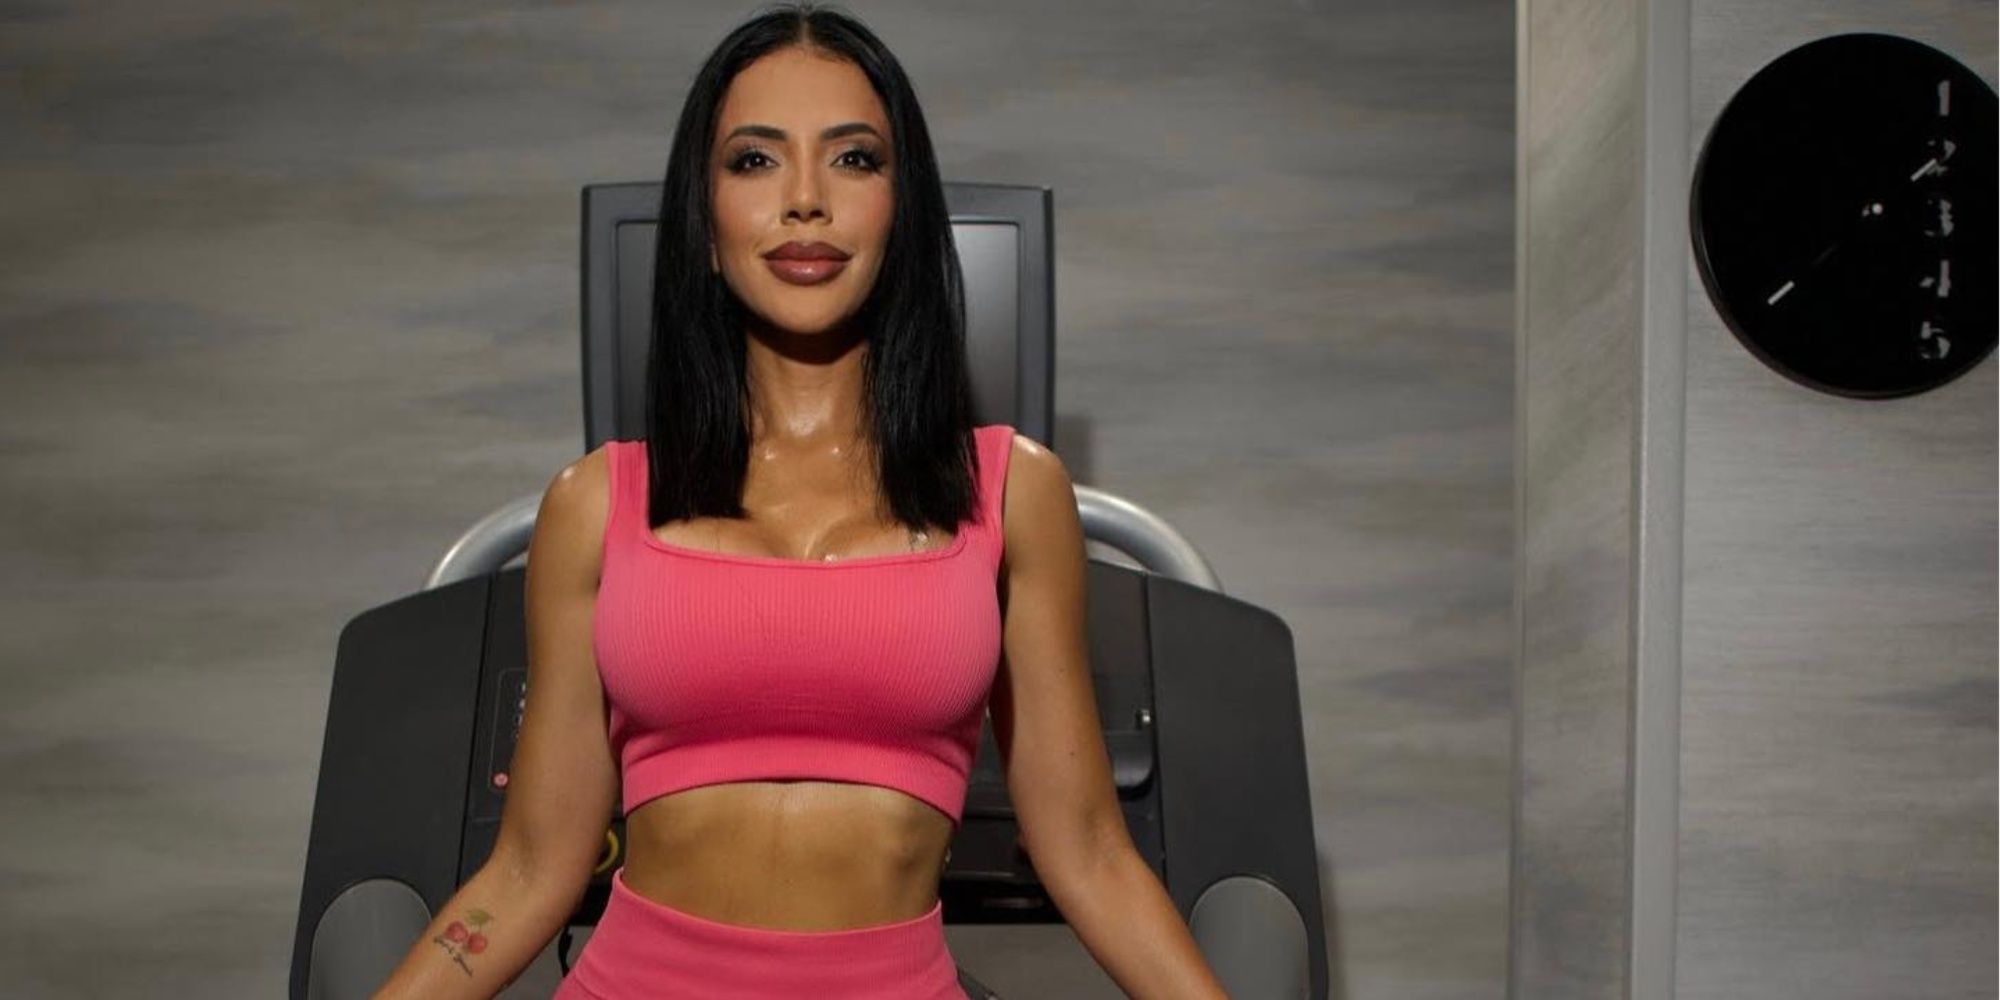 90 Day Fiancé star Jasmine Pineda posing in the gym with pink co-ord outfit